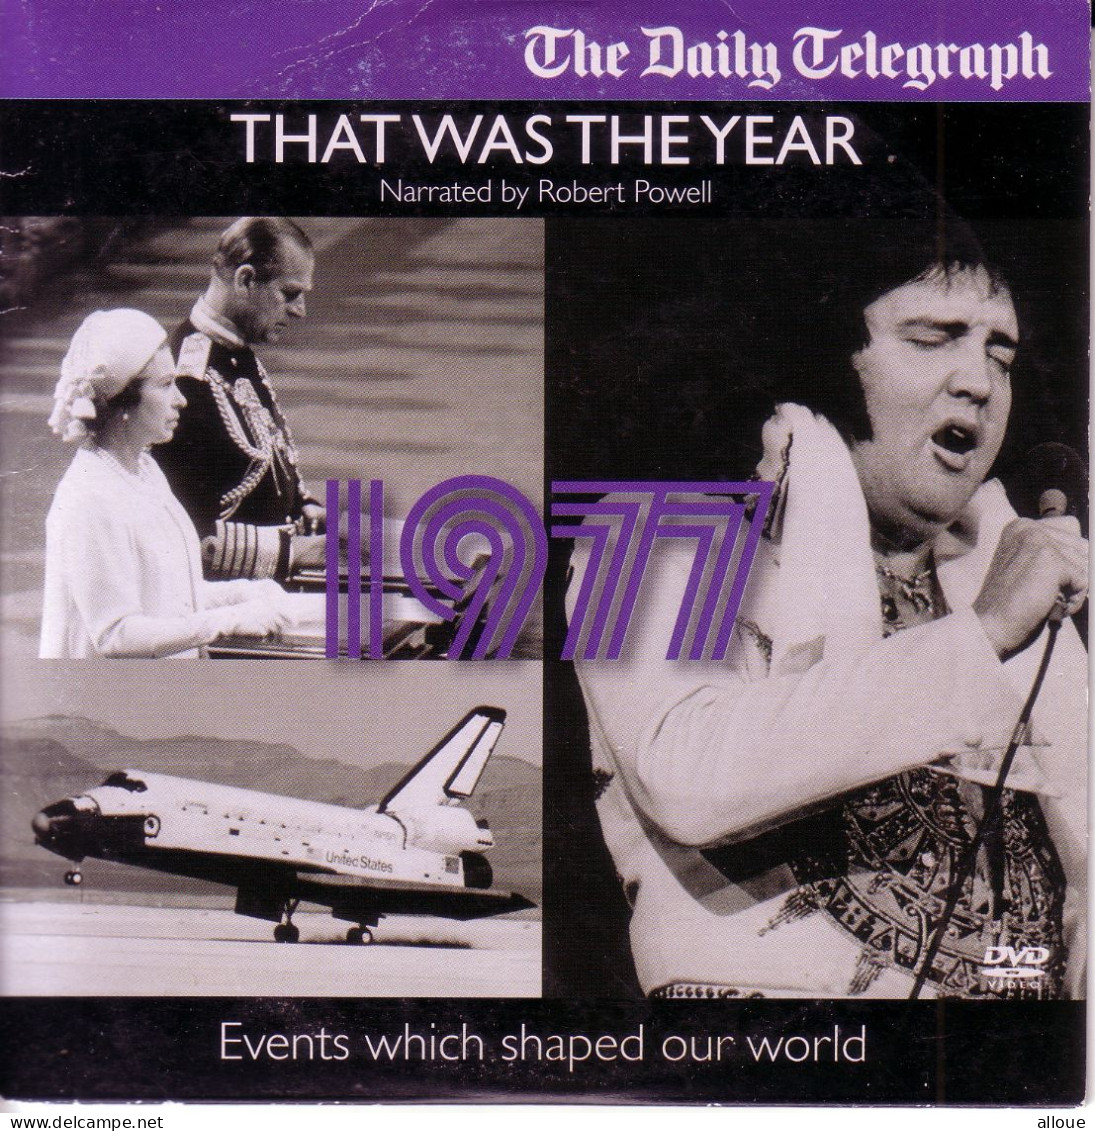 THAT WAS THE YEAR 1977 - CD DAILY TELEGRAPH - POCHETTE CARTON - THE QUEEN CELEBRATES HER SILVER JUBILEE - THE KING ELVIS - DVD Musicaux